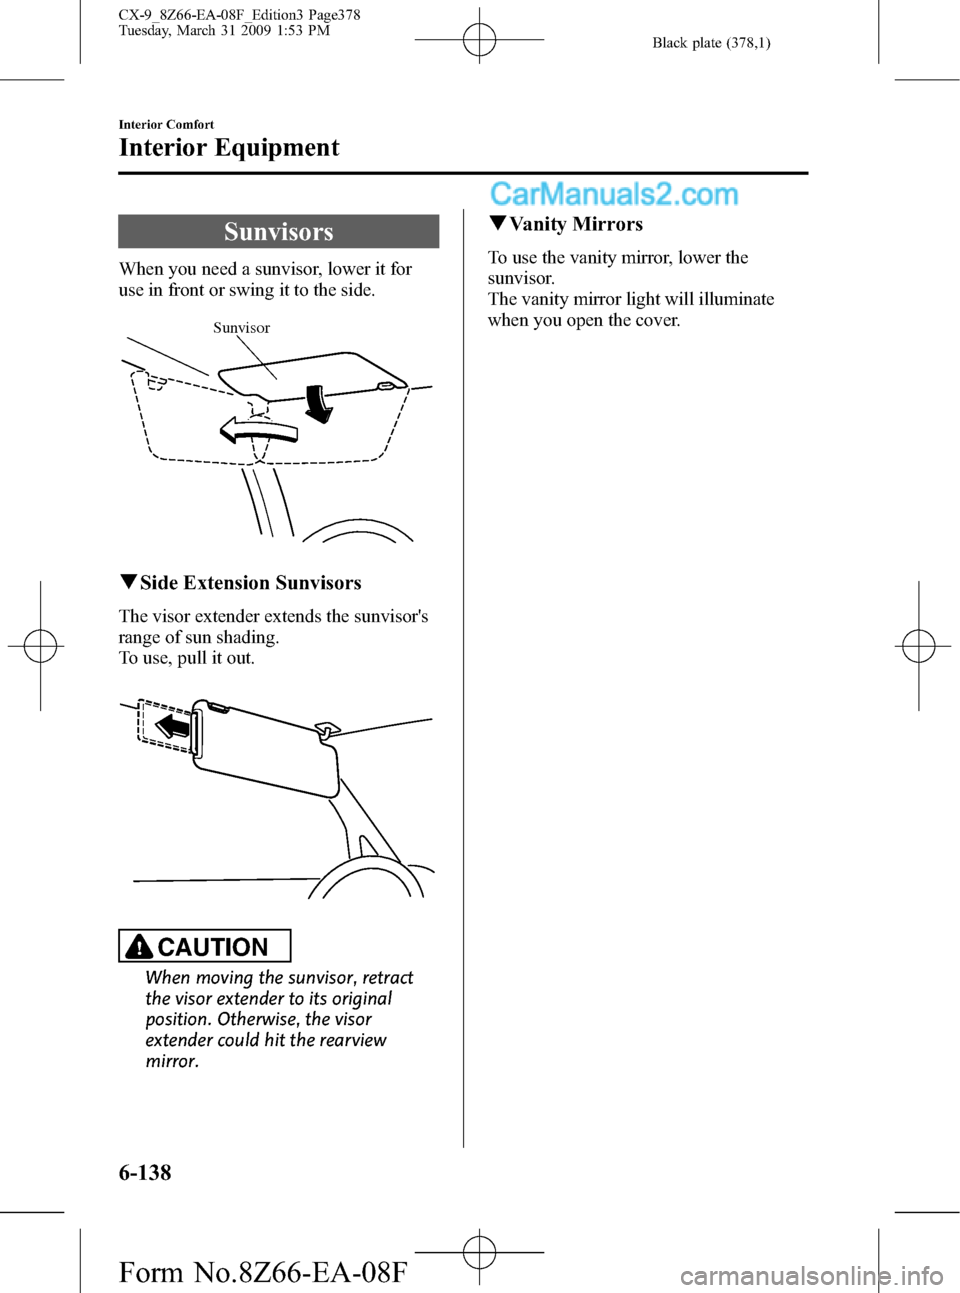 MAZDA MODEL CX-9 2009  Owners Manual (in English) Black plate (378,1)
Sunvisors
When you need a sunvisor, lower it for
use in front or swing it to the side.
Sunvisor
qSide Extension Sunvisors
The visor extender extends the sunvisors
range of sun sha